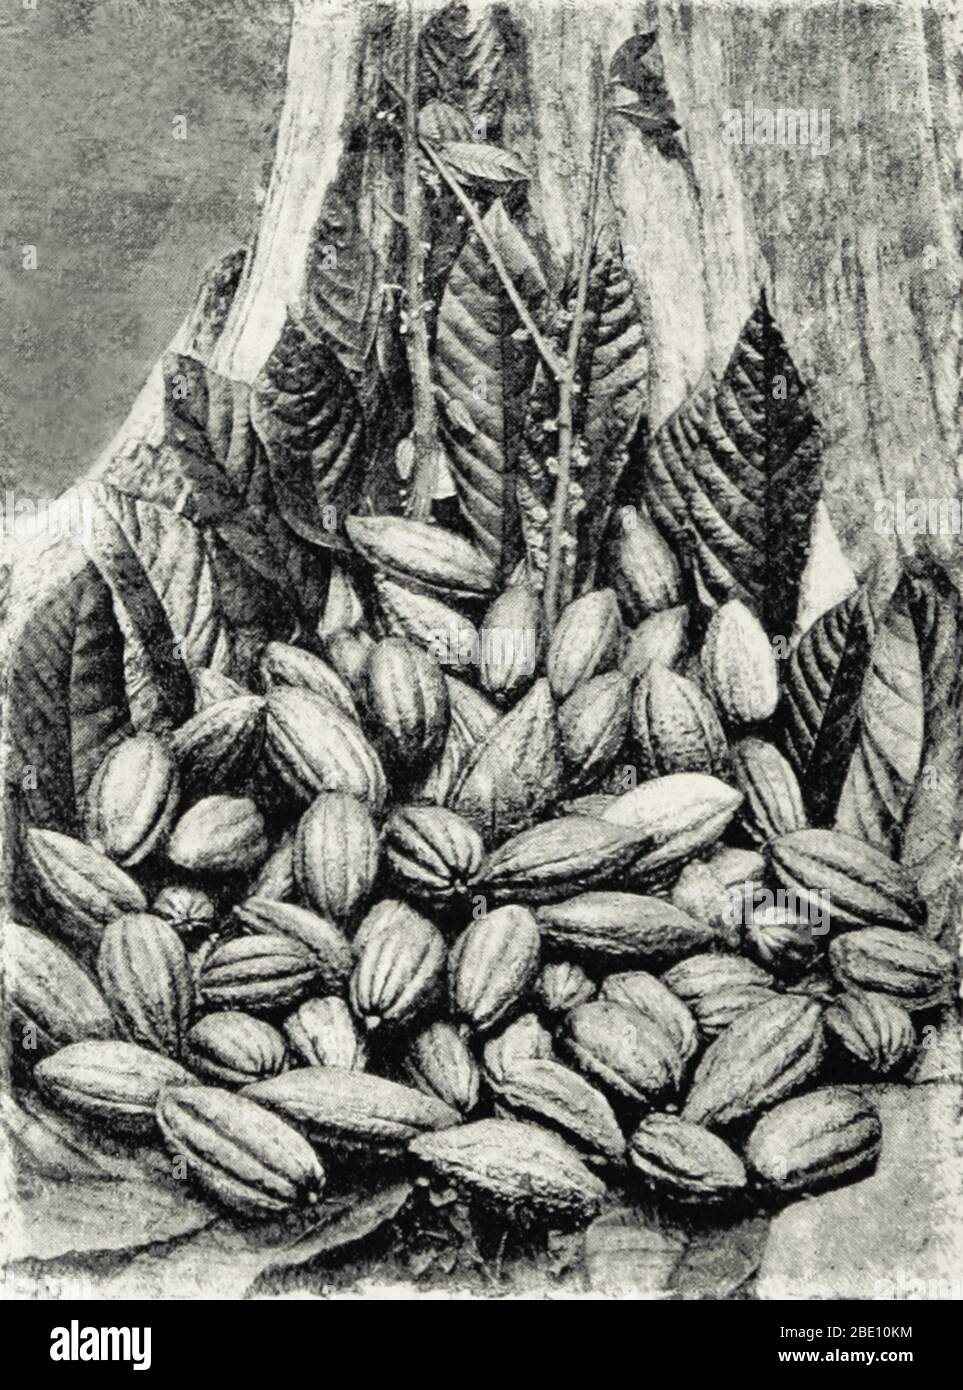 Cocoa pods from the cocoa tree (Theobroma cacao) in Ceylon, 1893. Until Columbus brought cacao beans back to Spain in the early 1500s, Europe was unfamiliar with the popular cocoa drink from the Central and South America. After the Spanish conquest of the Aztecs, chocolate began to be imported into Europe and quickly became a court favorite. Cacao plantations in the colonies spread, run on slave labor, while drinking cocoa was considered variously exotic, fashionable, medicinal, and dangerous. Chocolate production developed over the centuries, until modern-style chocolate bars were created in Stock Photo